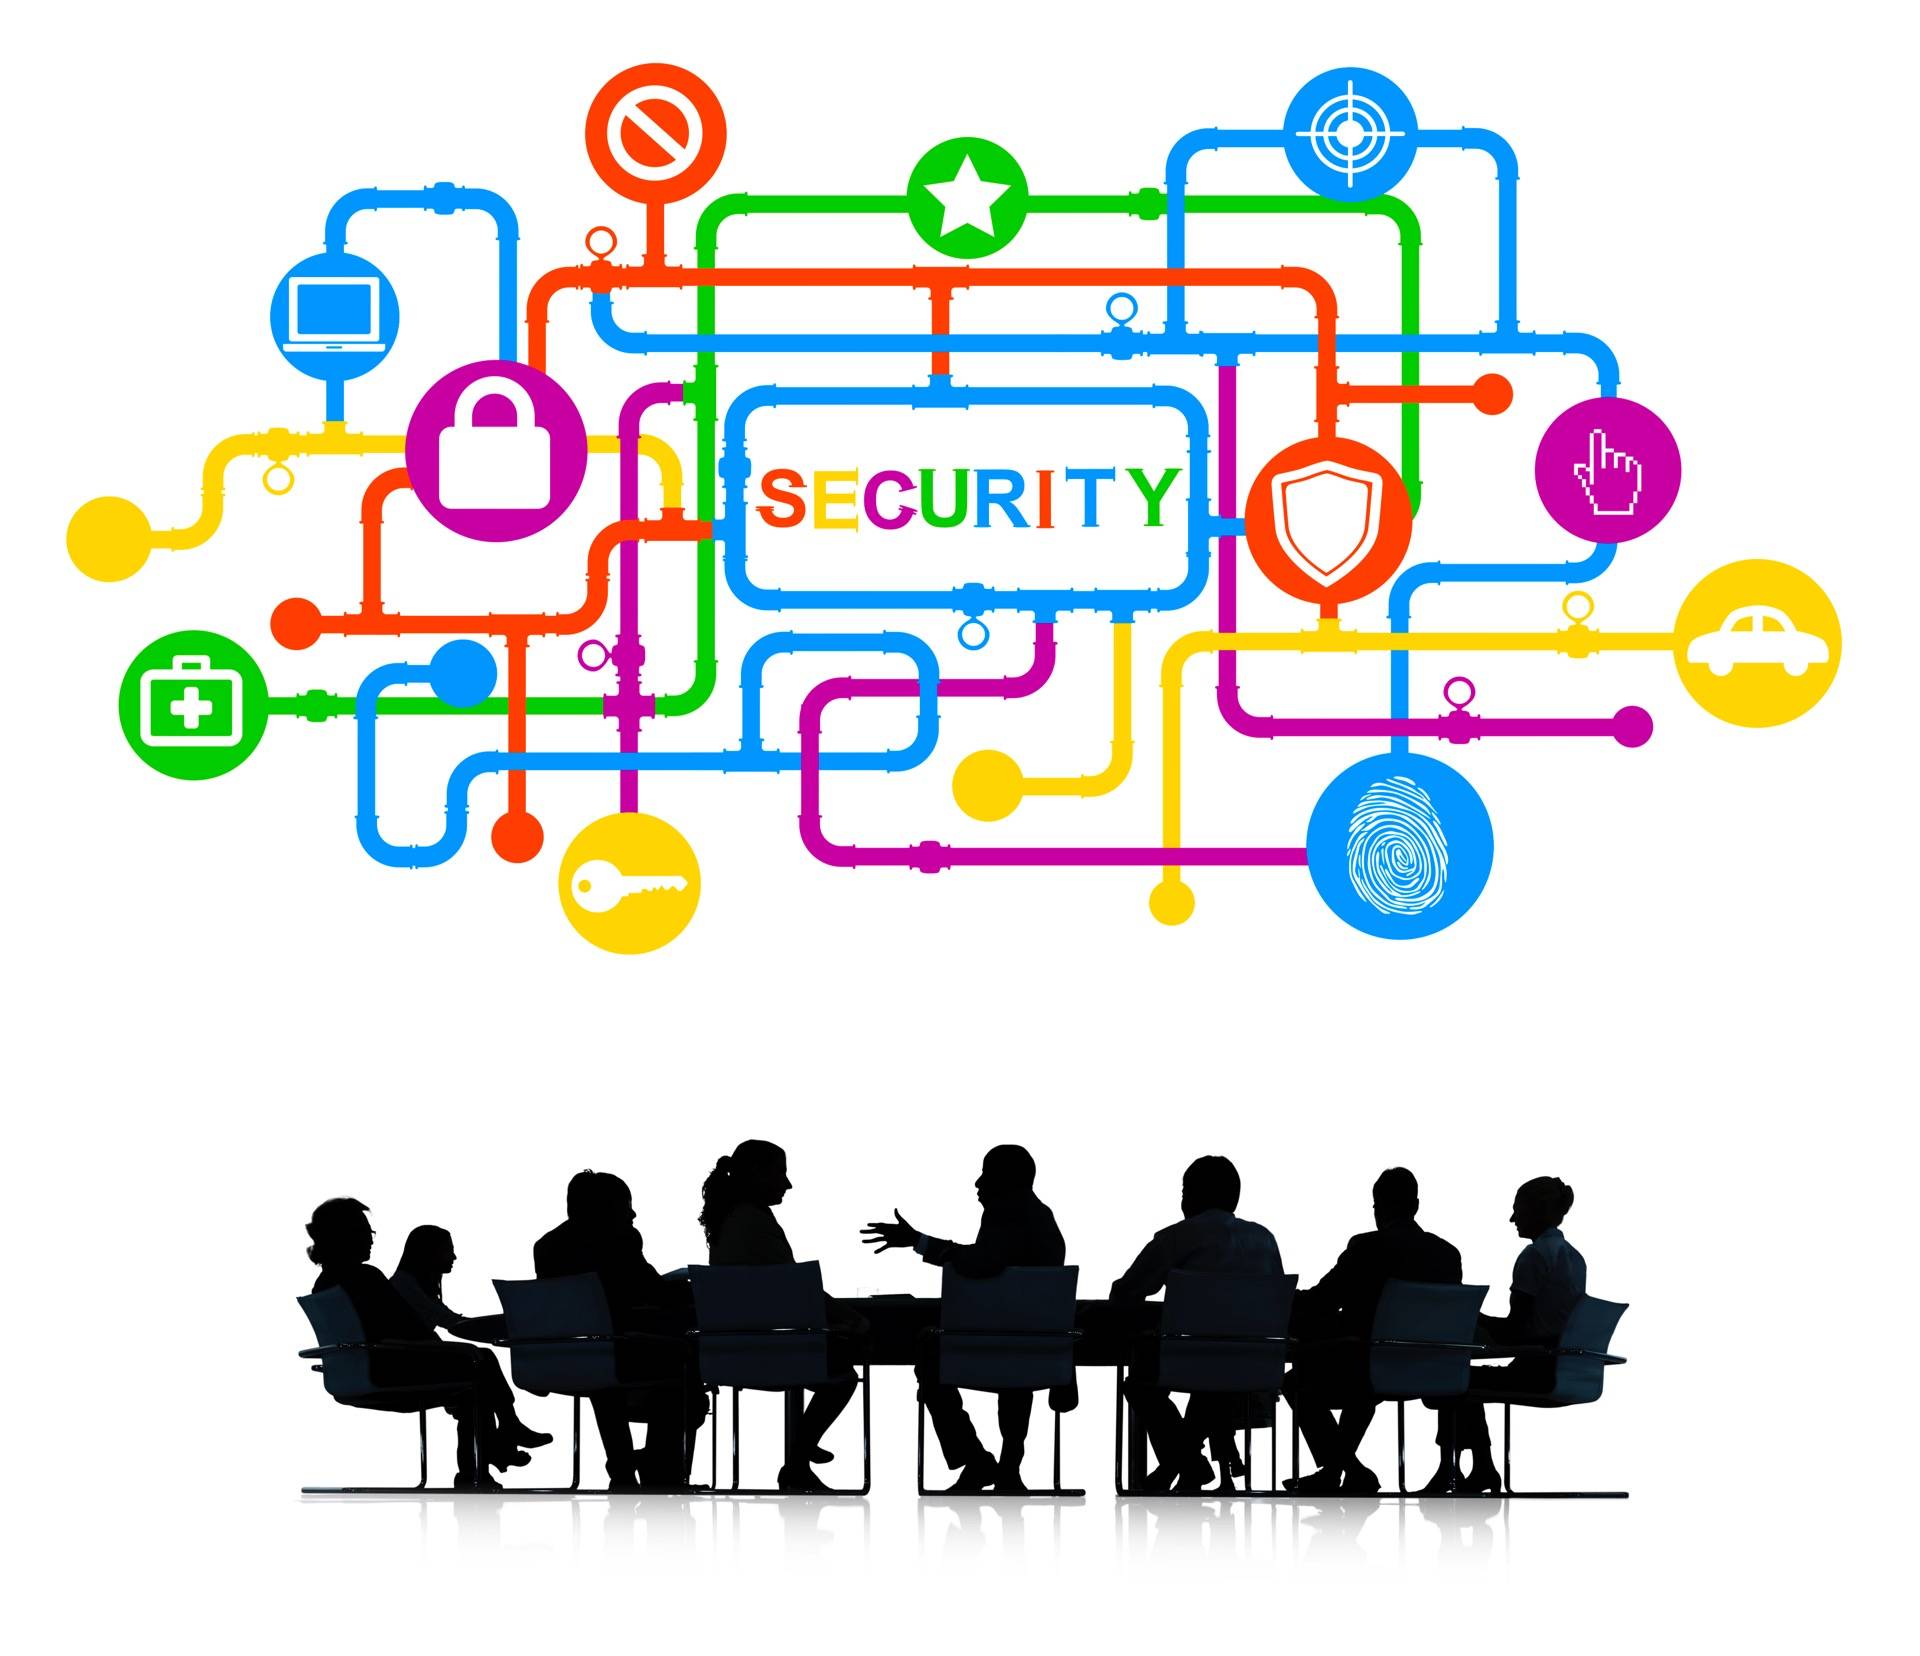 cybersecurity consulting